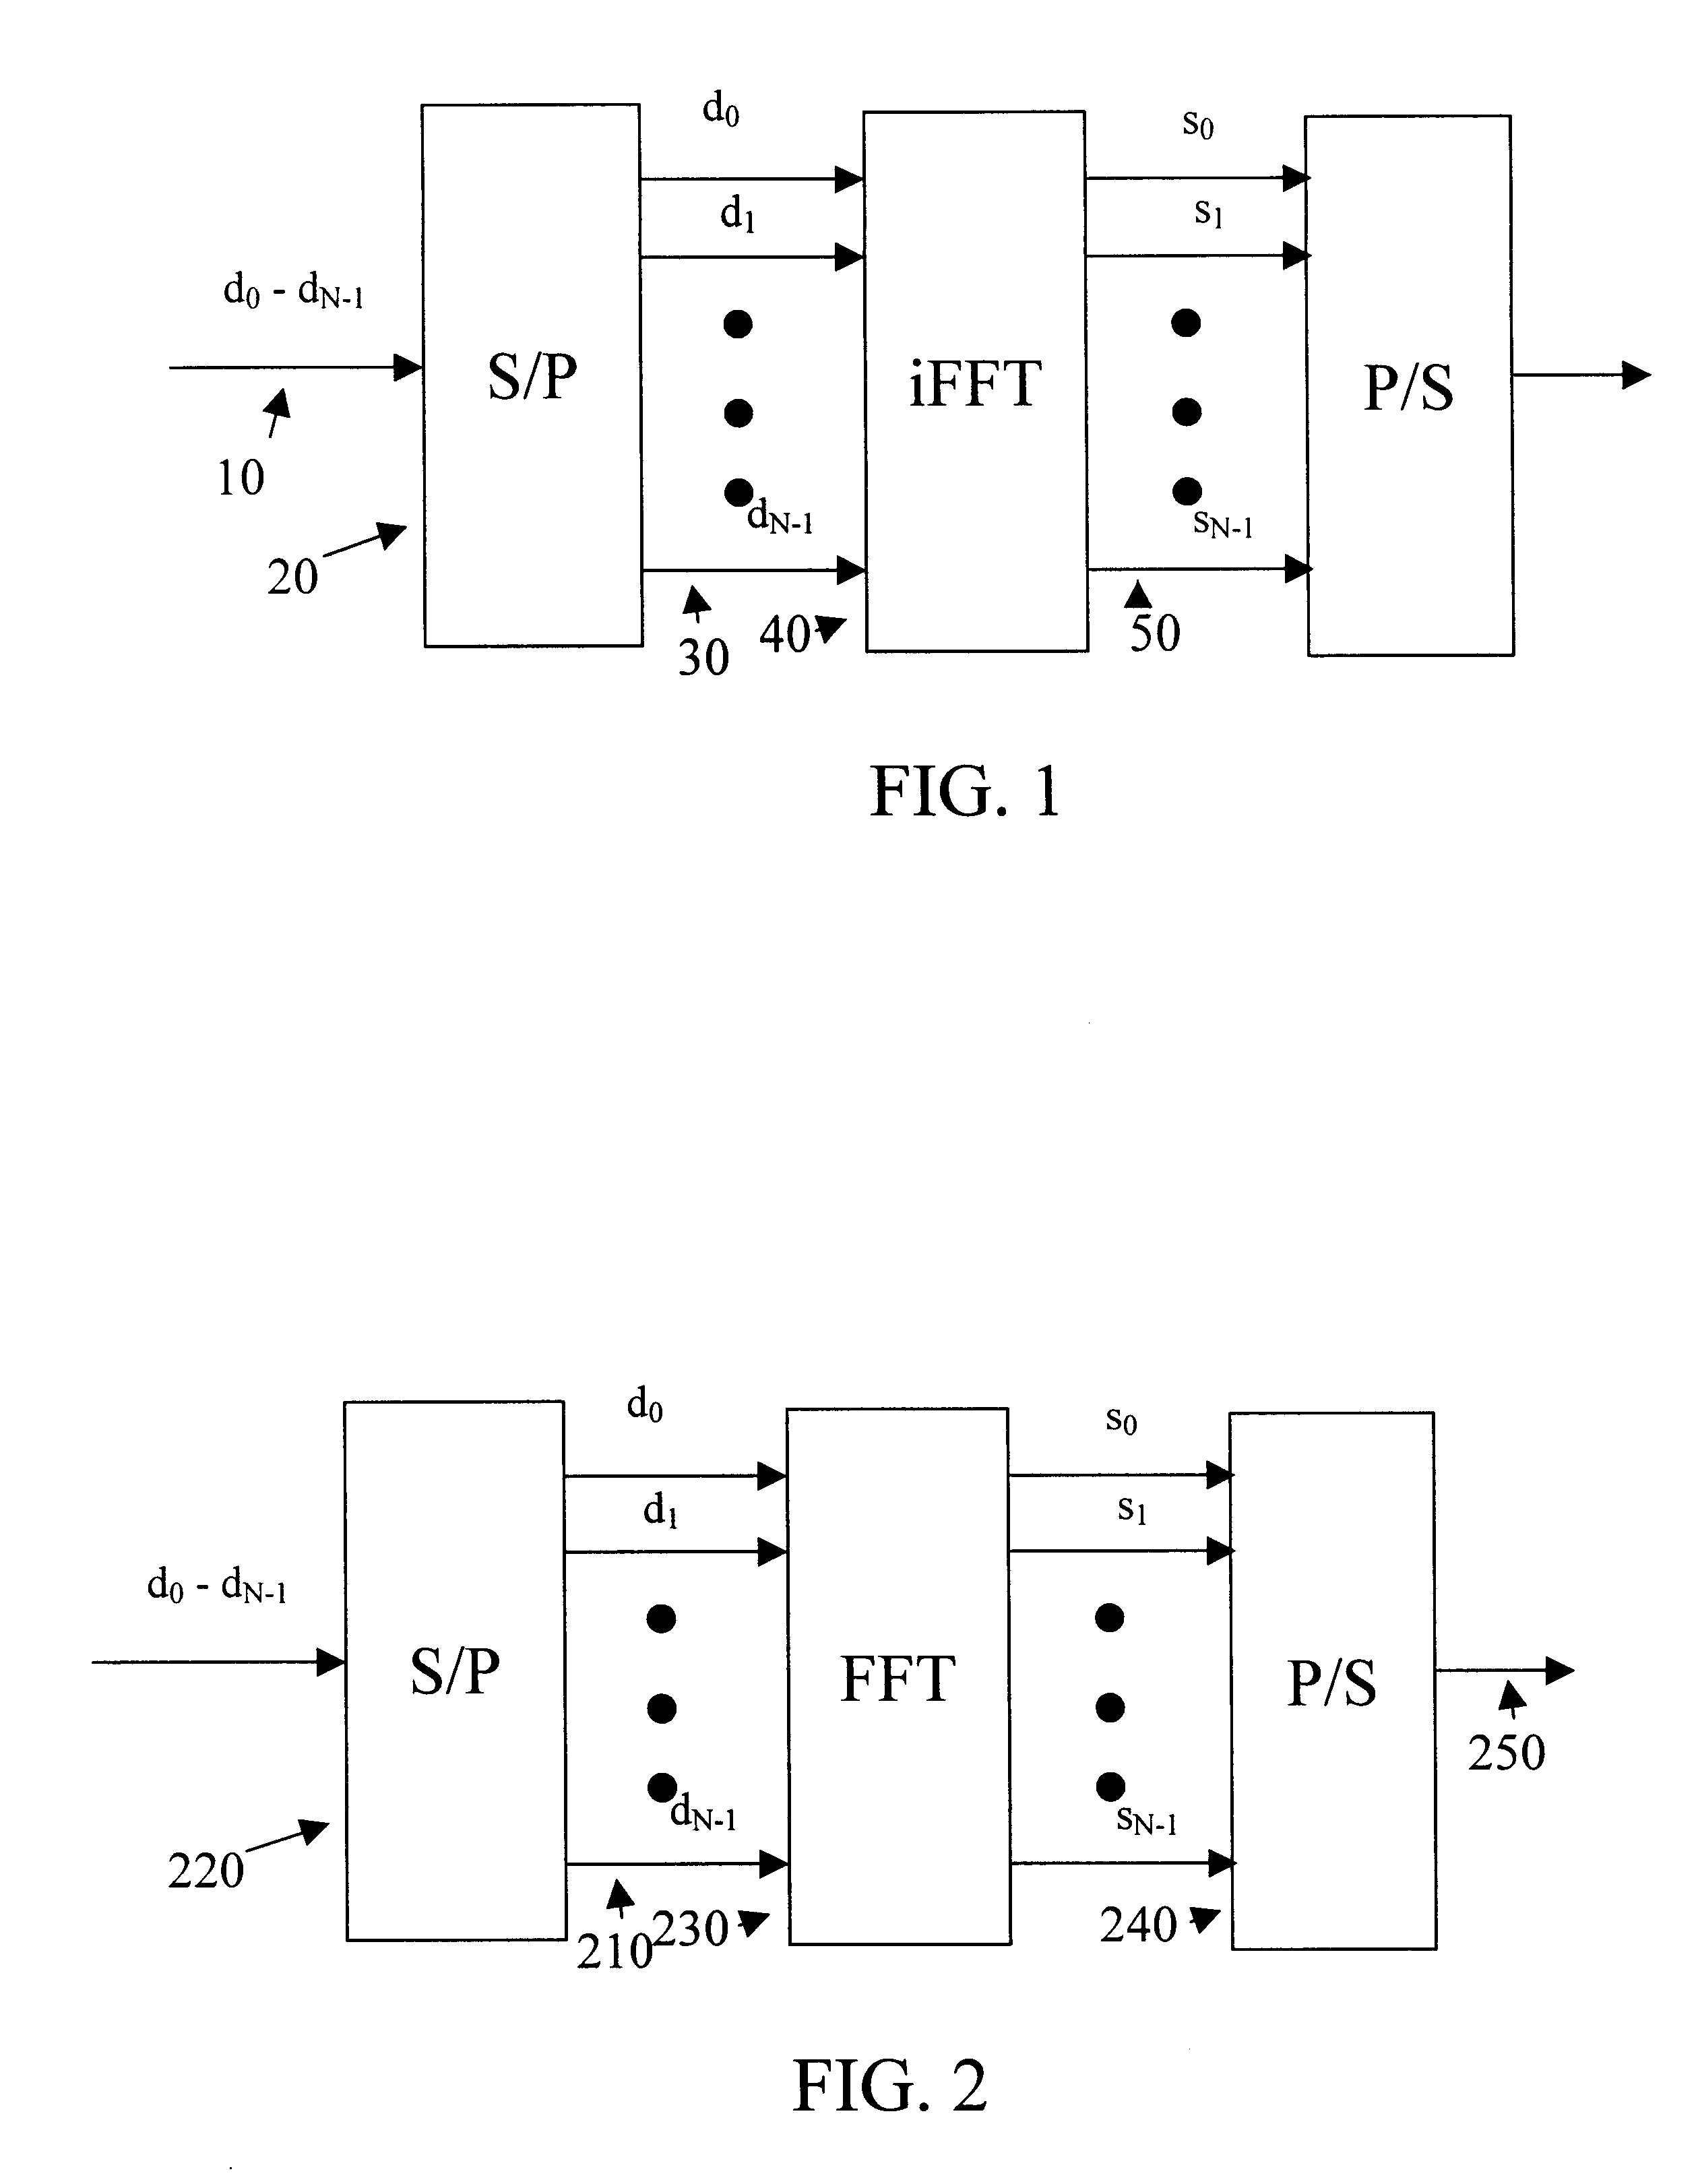 Protocols for scalable communication system using overland signals and multi-carrier frequency communication